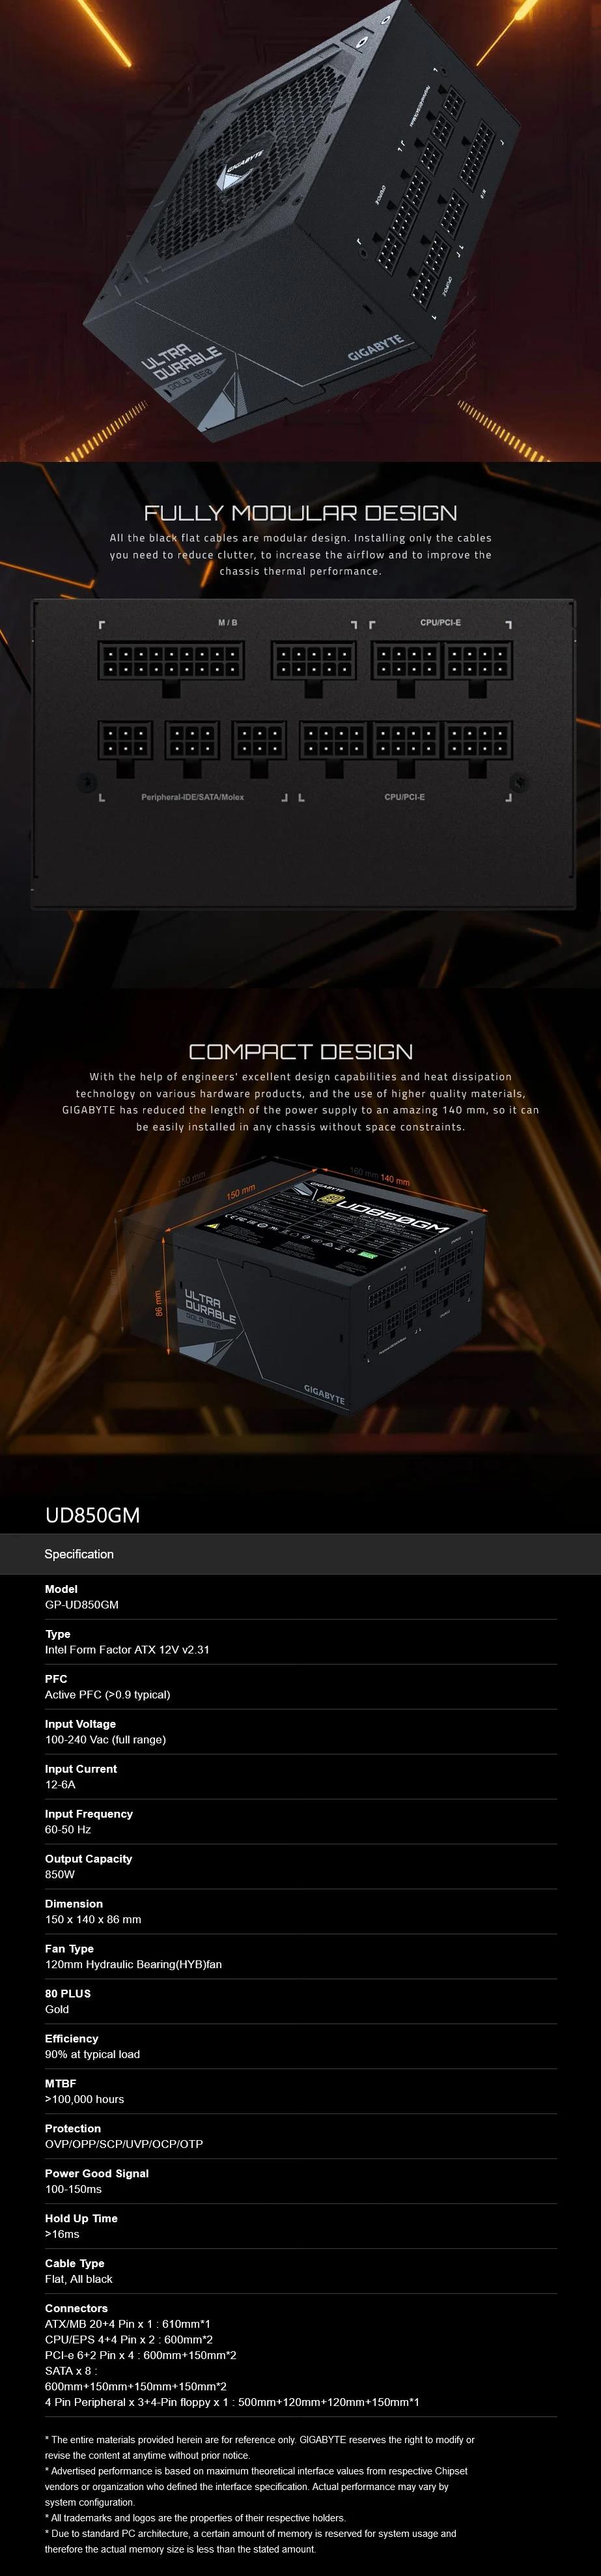 A large marketing image providing additional information about the product Gigabyte UD850GM 850W Gold ATX Modular PSU - Additional alt info not provided